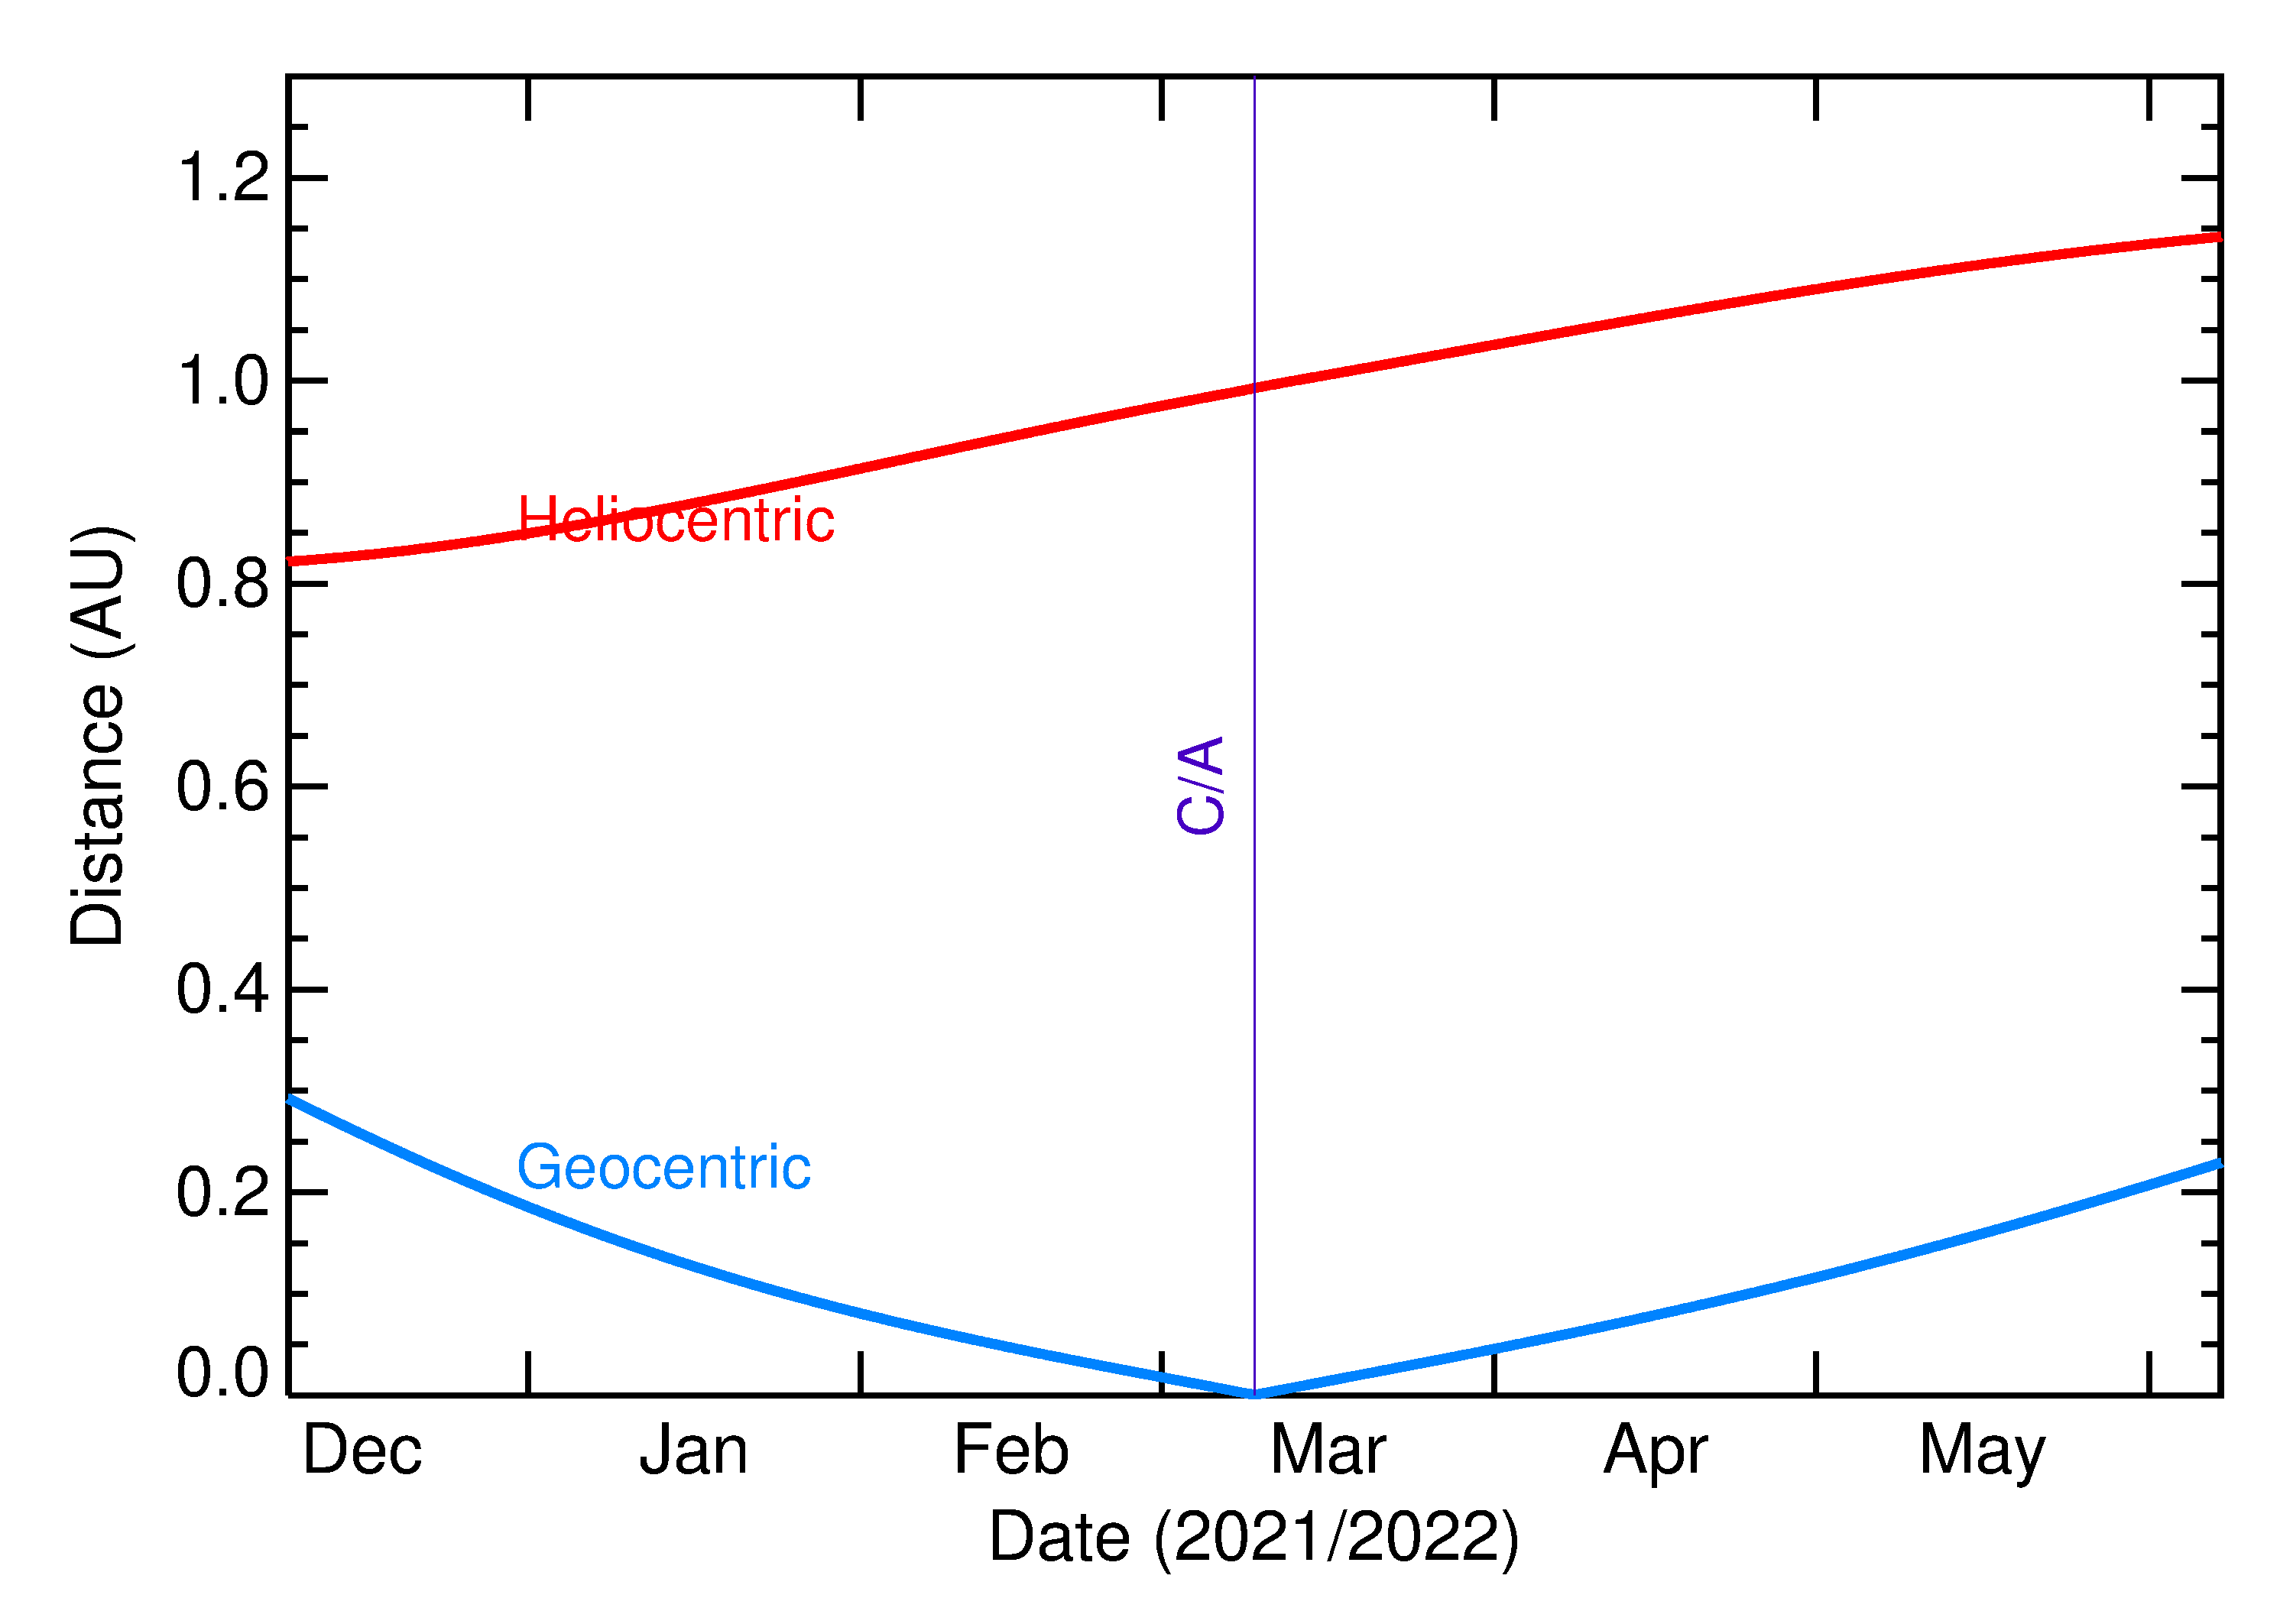 Heliocentric and Geocentric Distances of 2022 EE5 in the months around closest approach